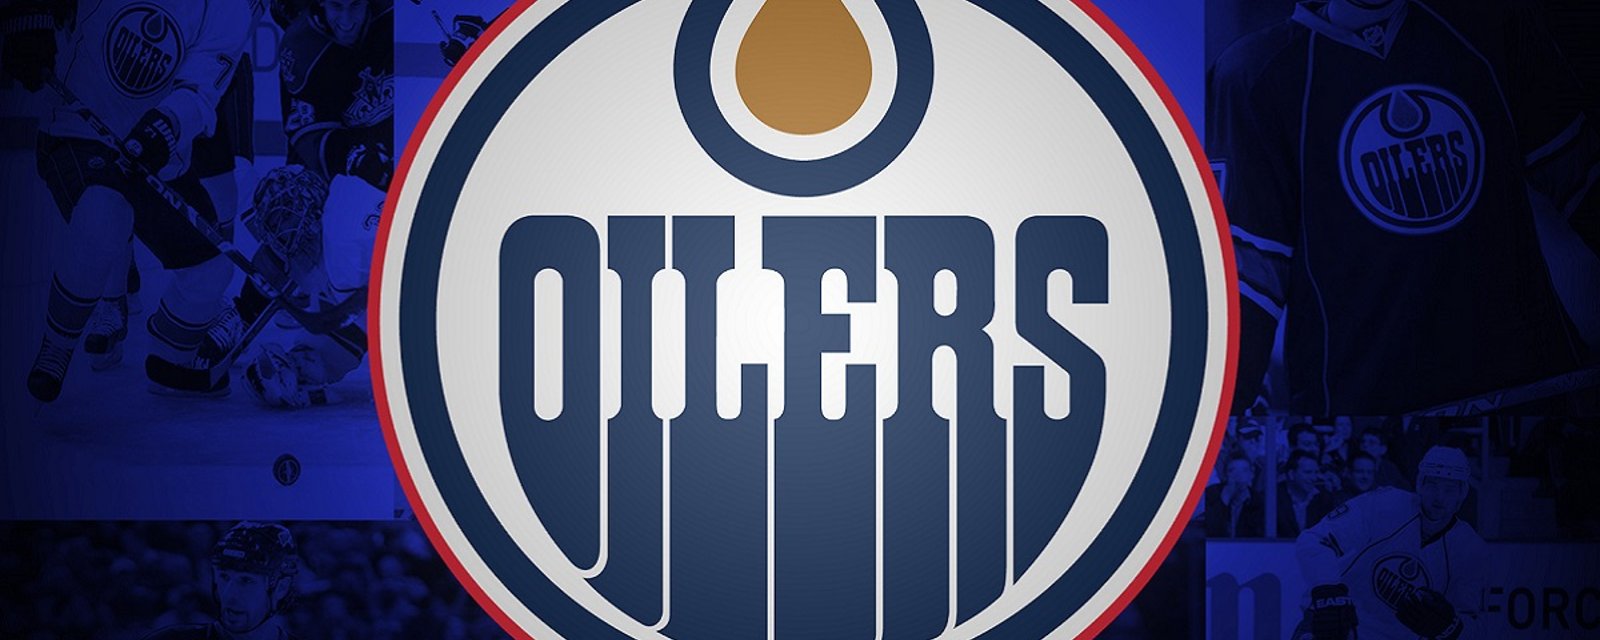 Chiarelli's best move as an Oiler may have been the trade he rejected.